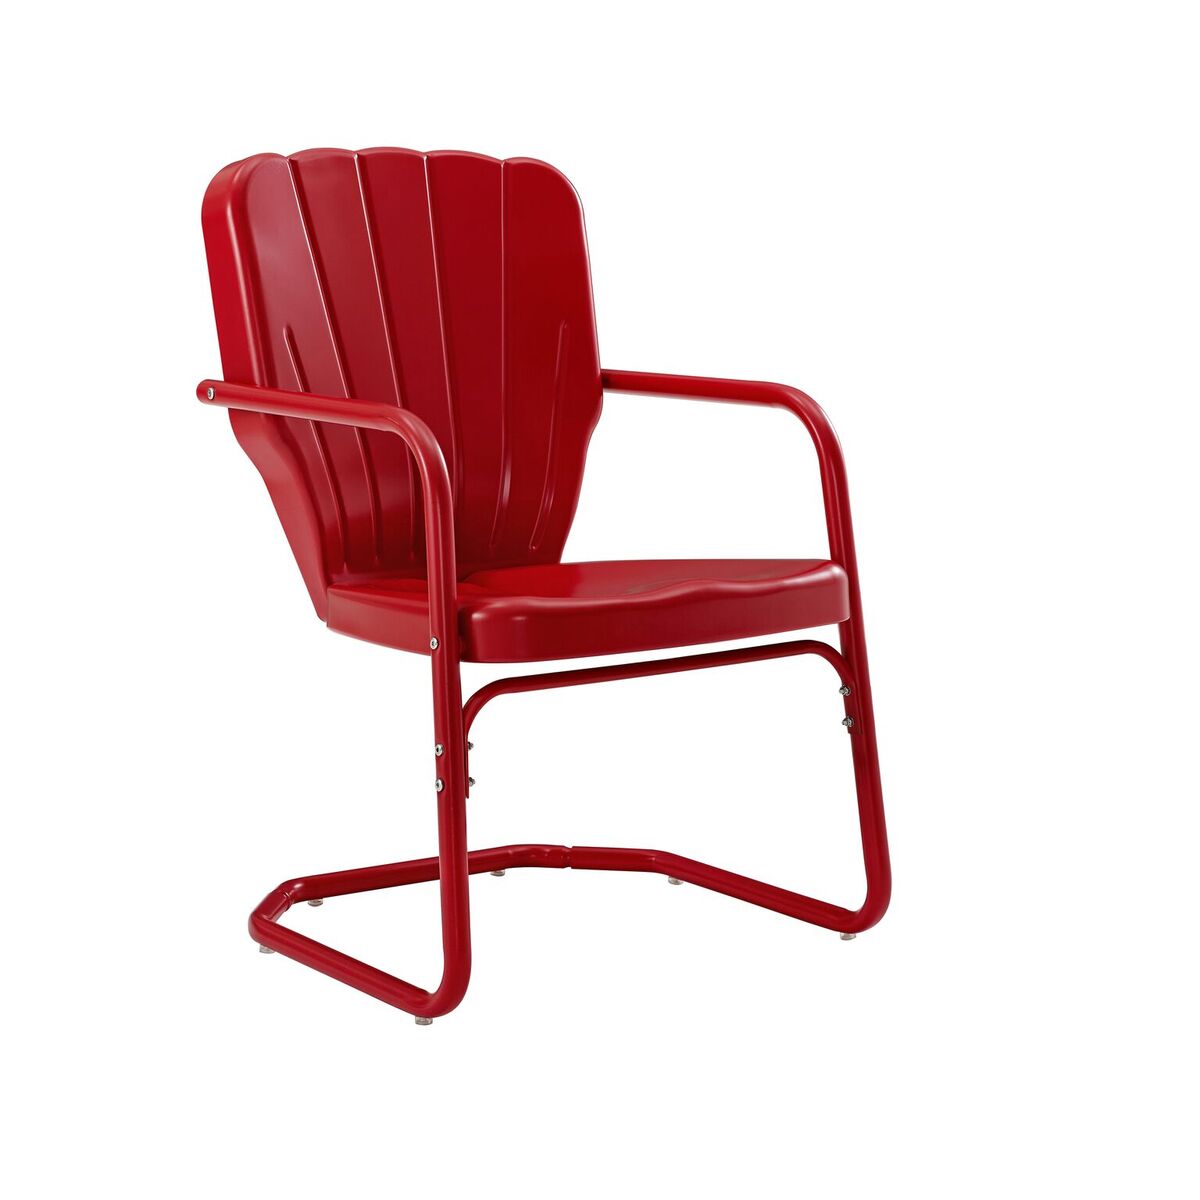 Picture of Crosley Furniture CO1031-RE Ridgeland Metal Chair, Red Gloss - Set of 2, 34.25 x 19.5 x 23.25 in.